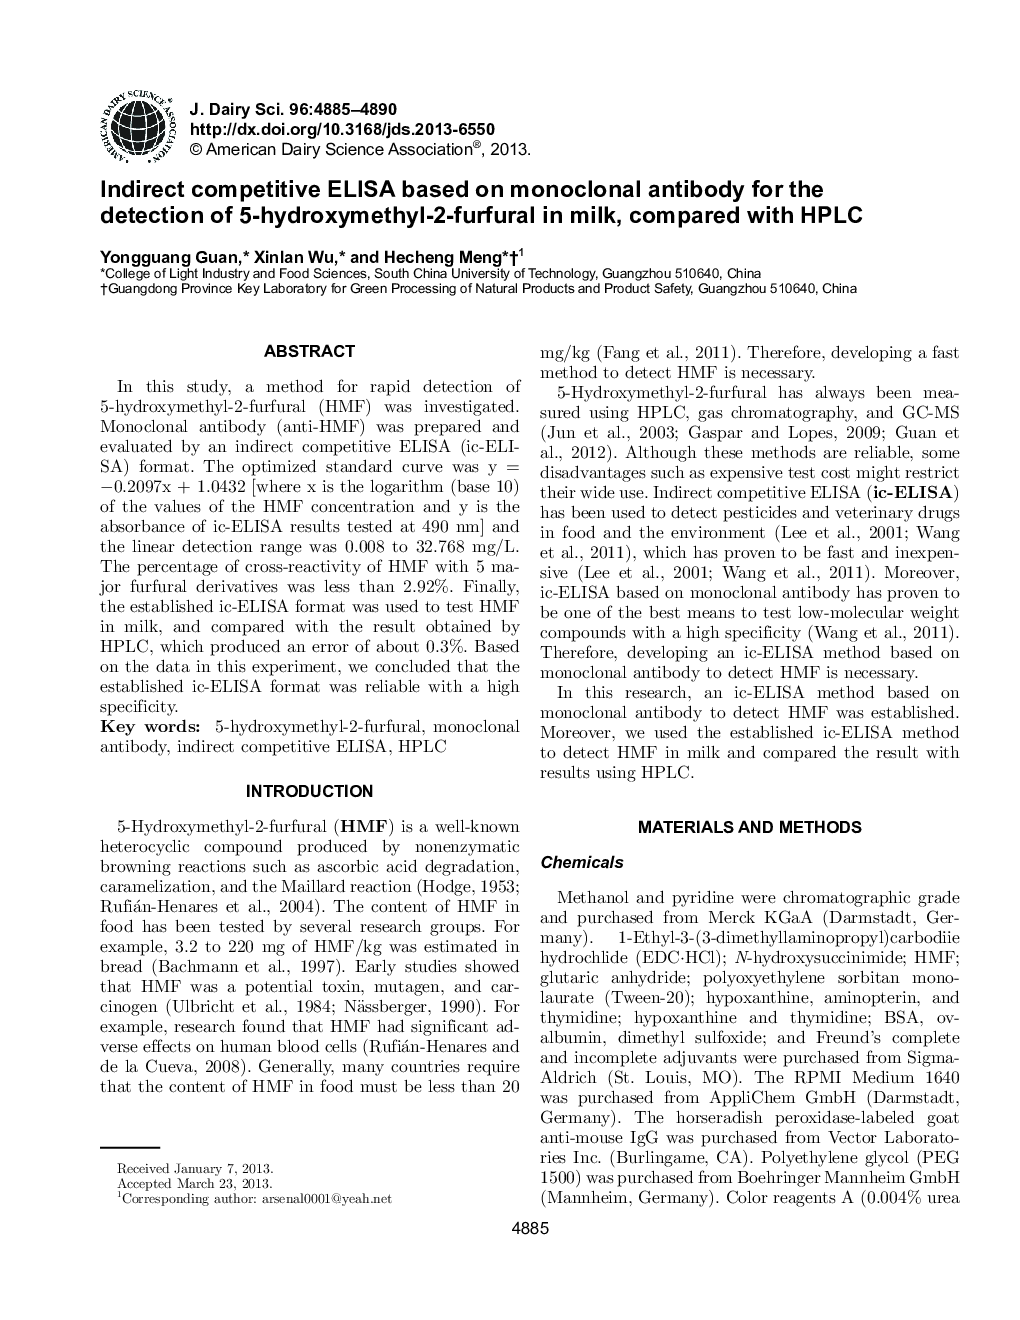 Indirect competitive ELISA based on monoclonal antibody for the detection of 5-hydroxymethyl-2-furfural in milk, compared with HPLC